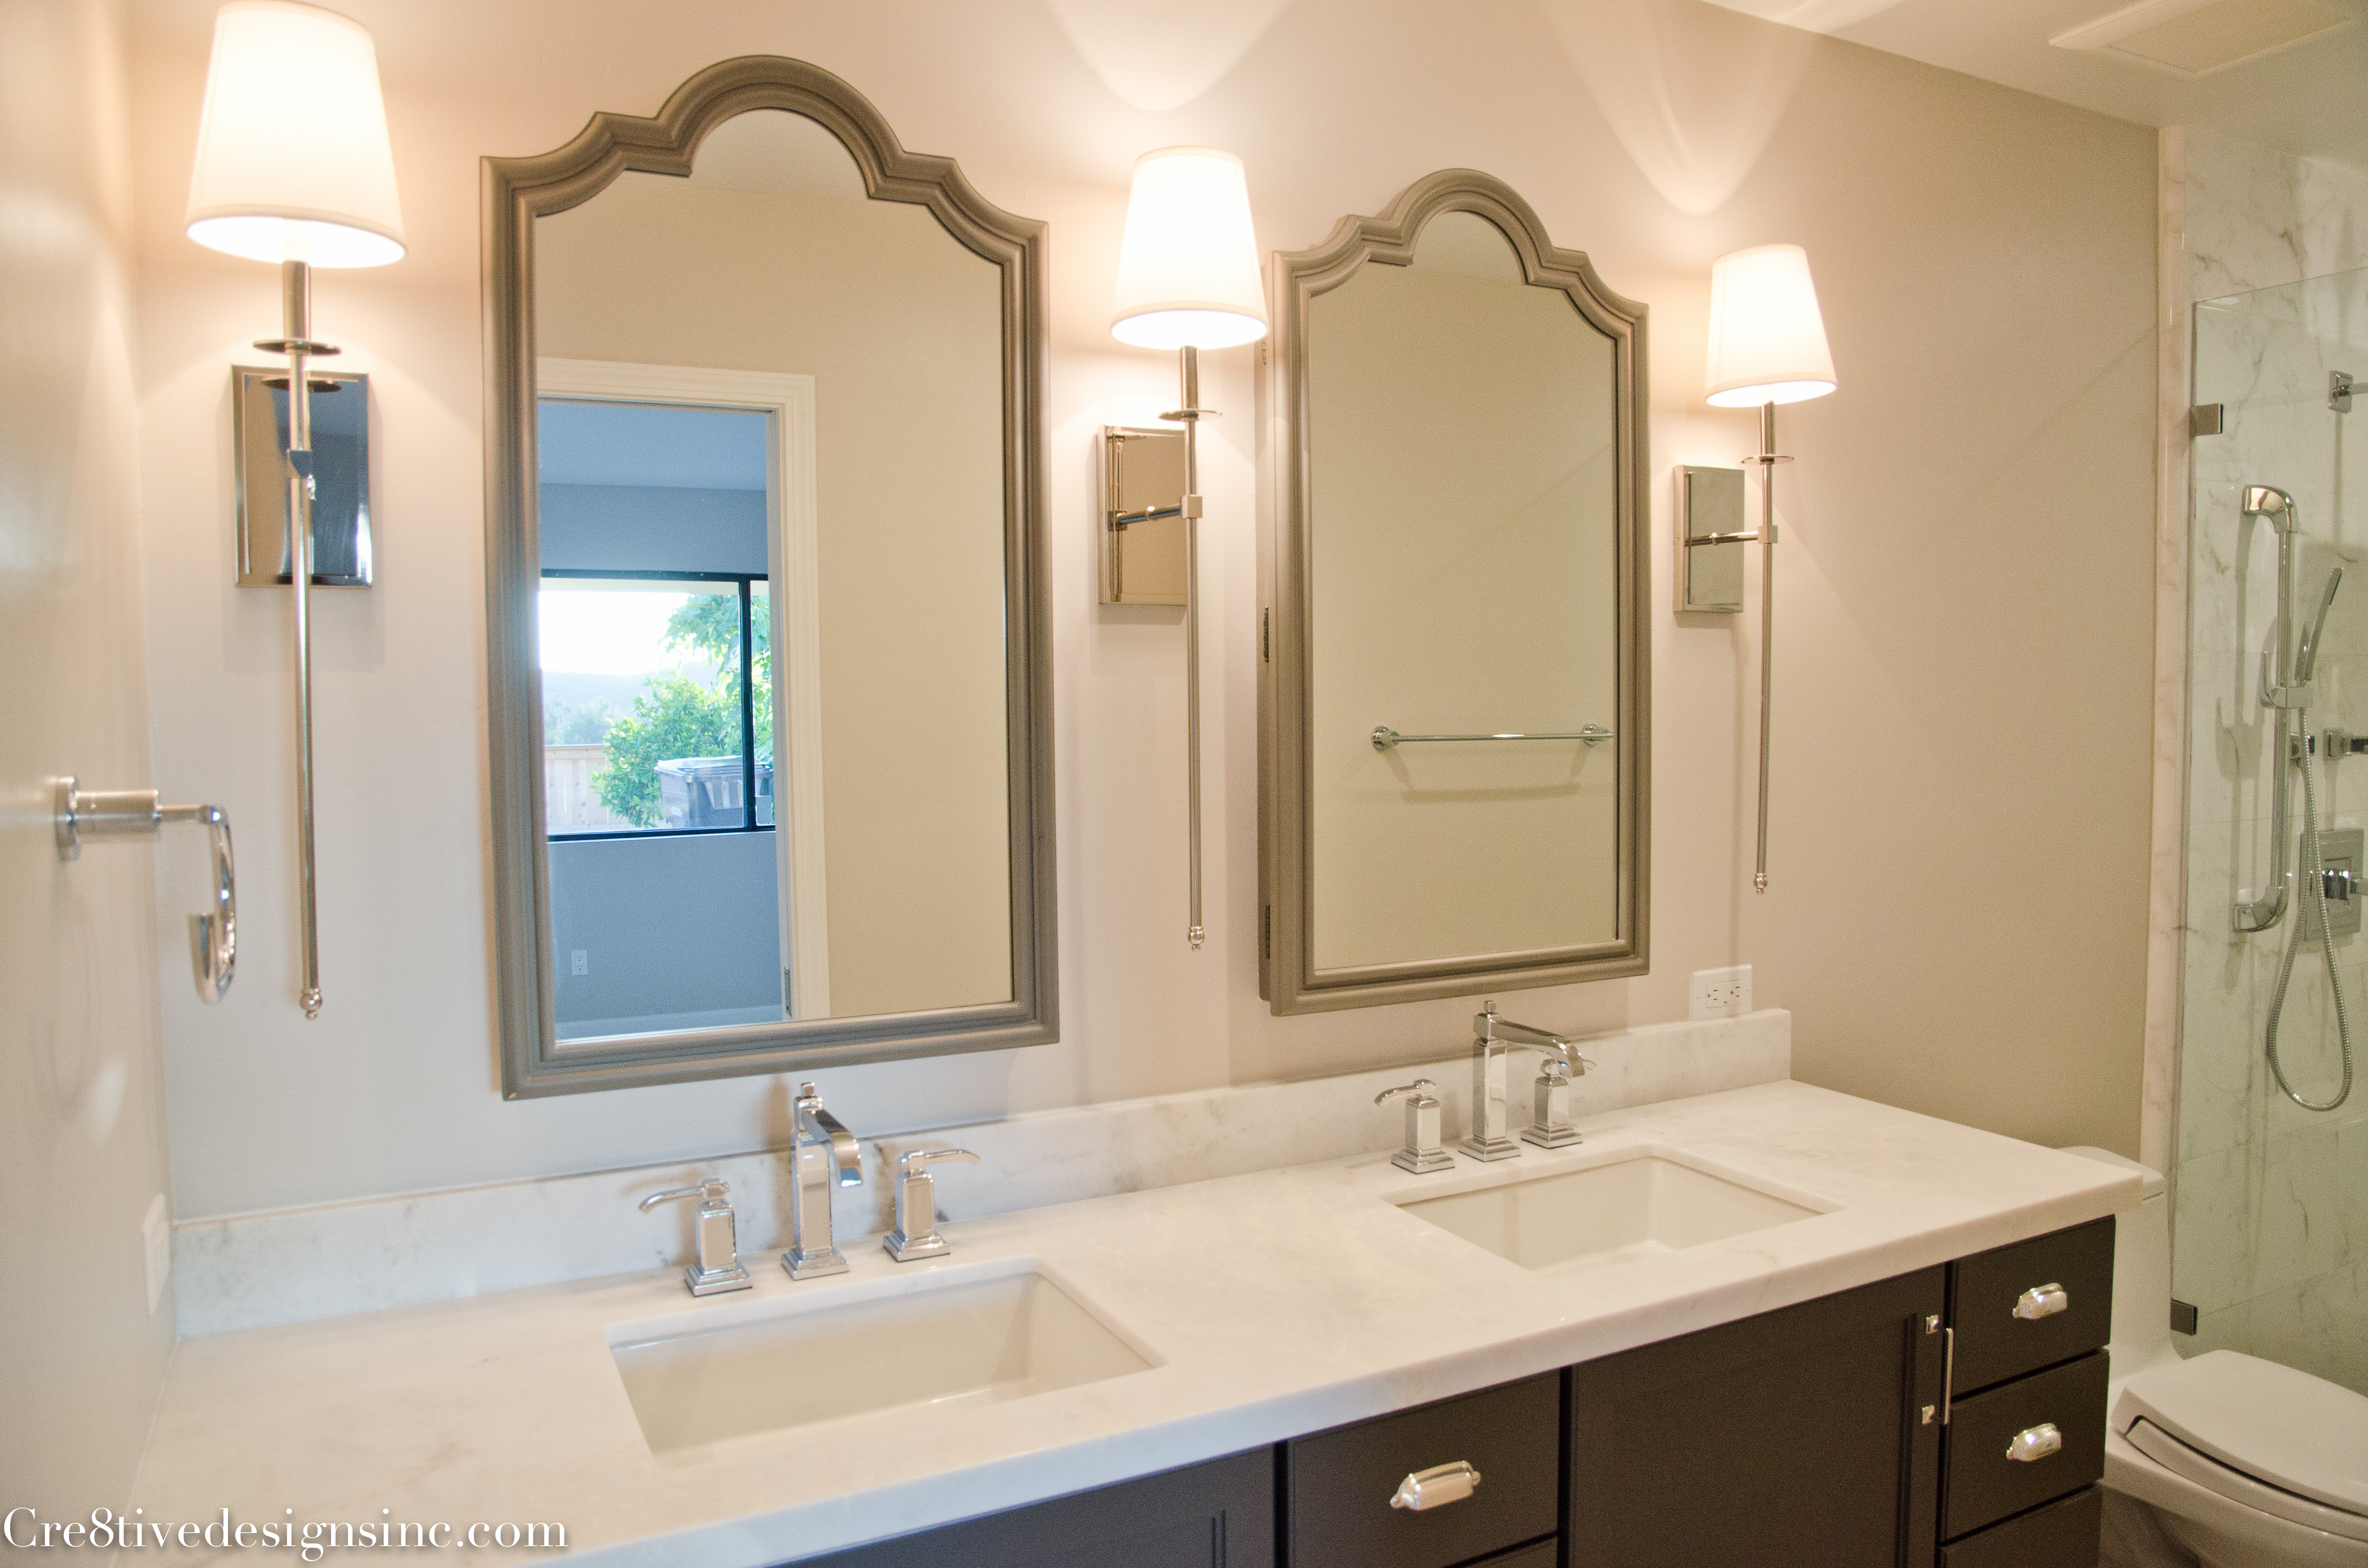 San Diego Bathroom Remodel At Home And Interior Design Ideas